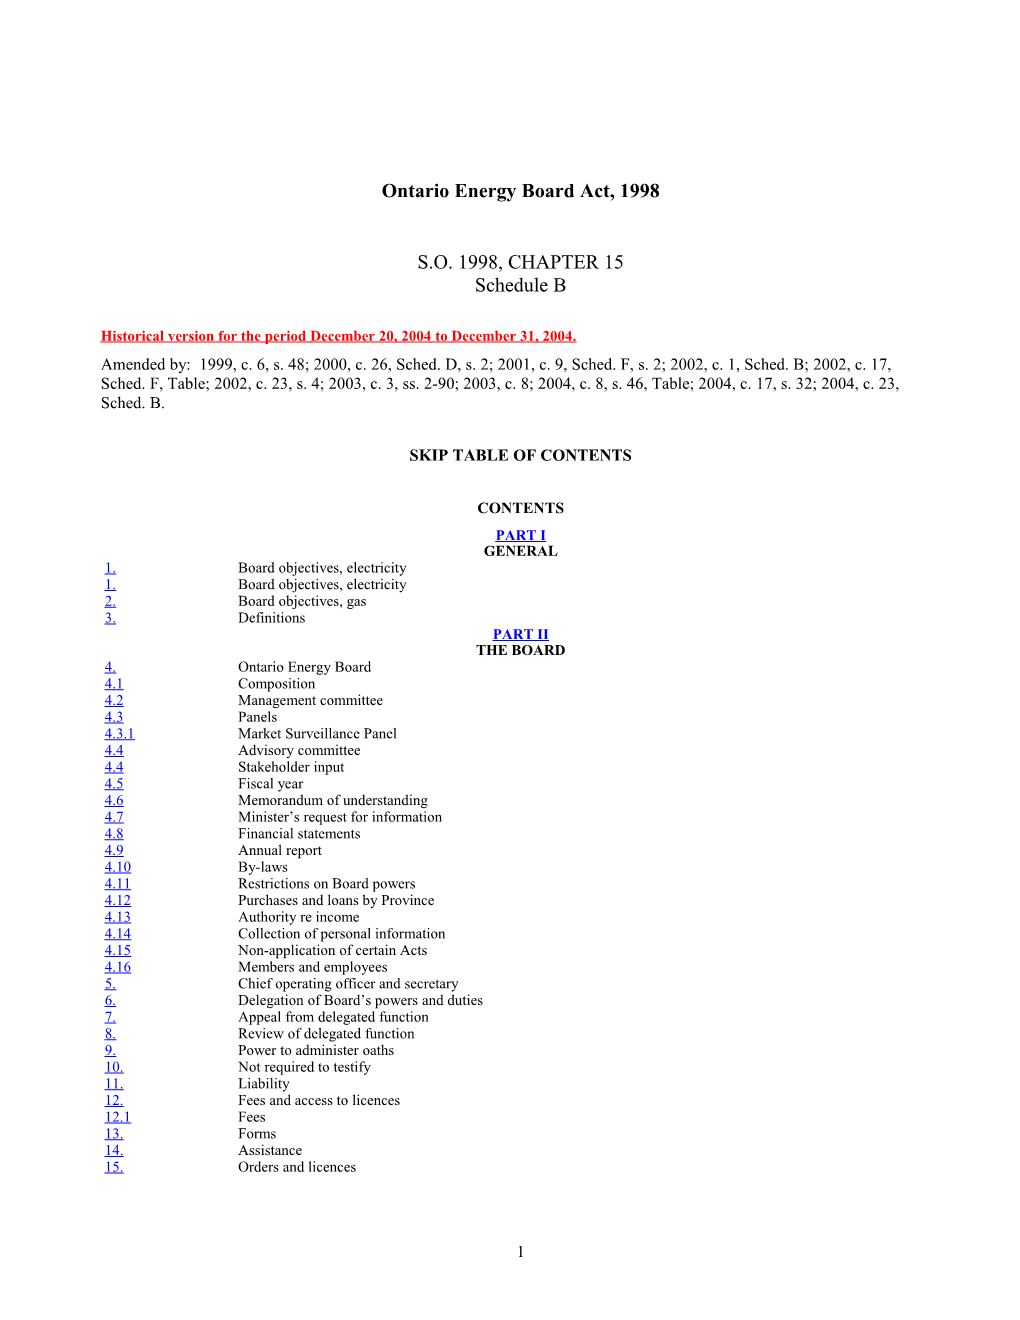 Ontario Energy Board Act, 1998, S.O. 1998, C. 15, Sched. B